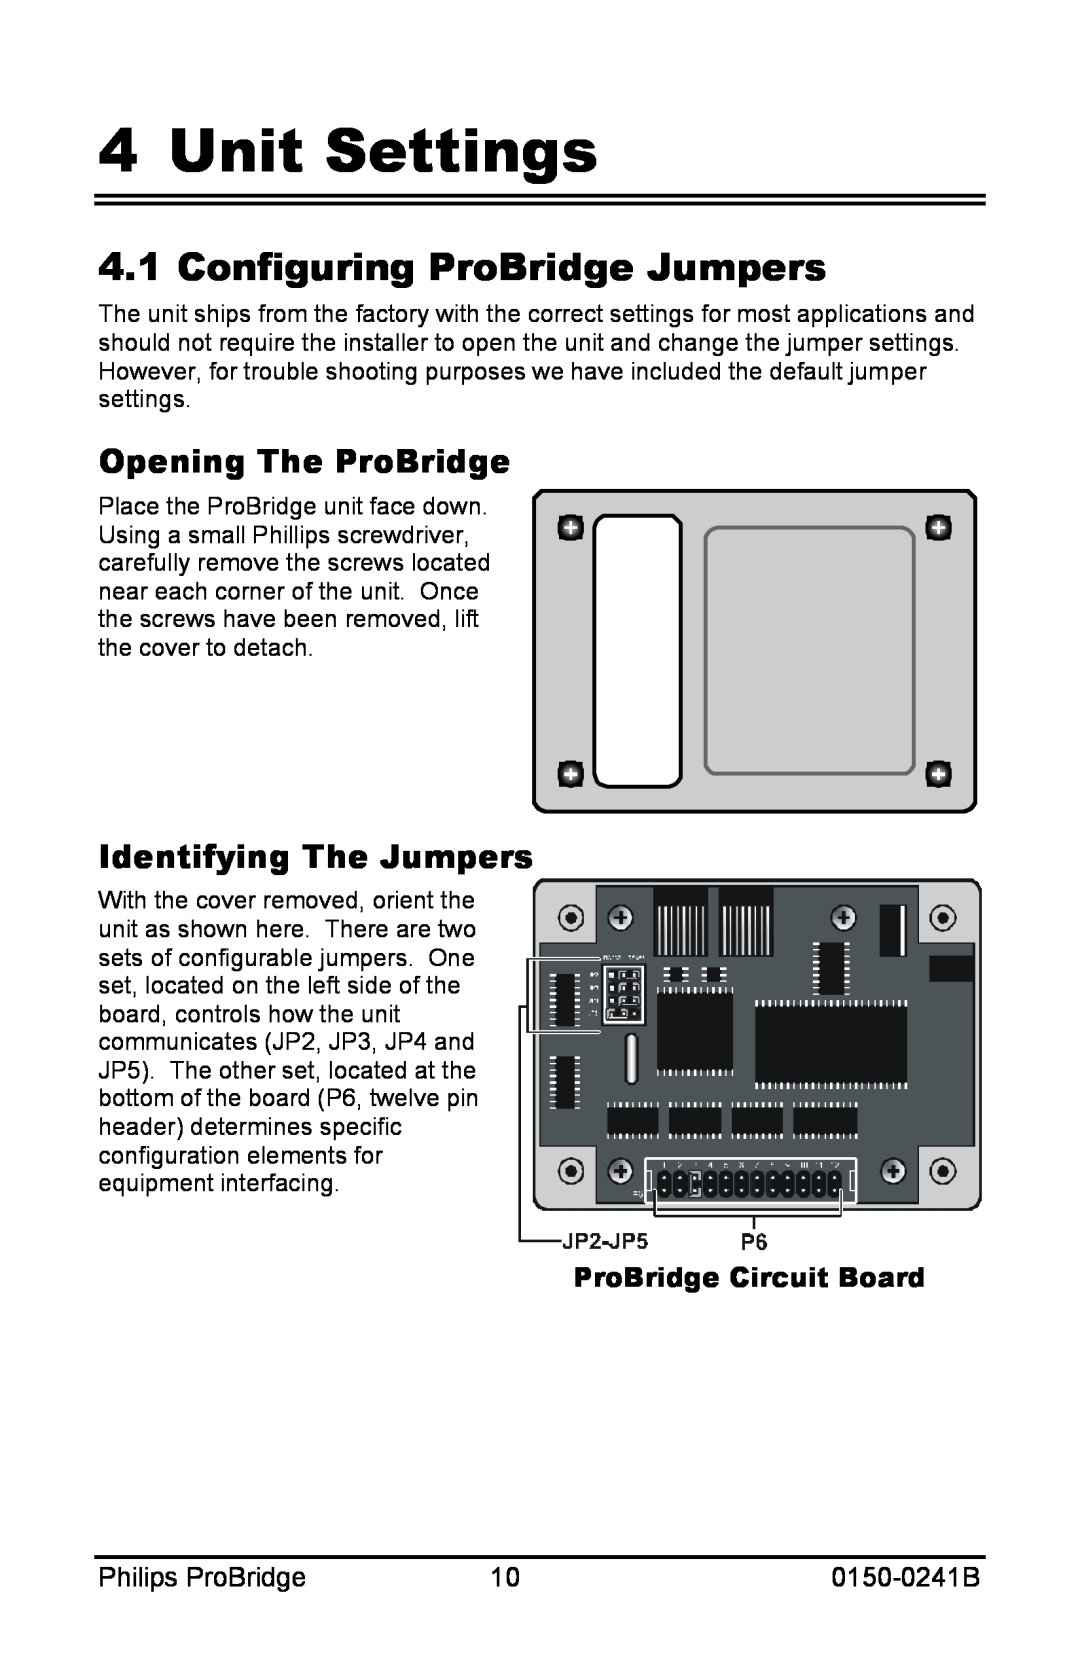 Philips 0150-0241B user manual Unit Settings, Configuring ProBridge Jumpers, Opening The ProBridge, Identifying The Jumpers 